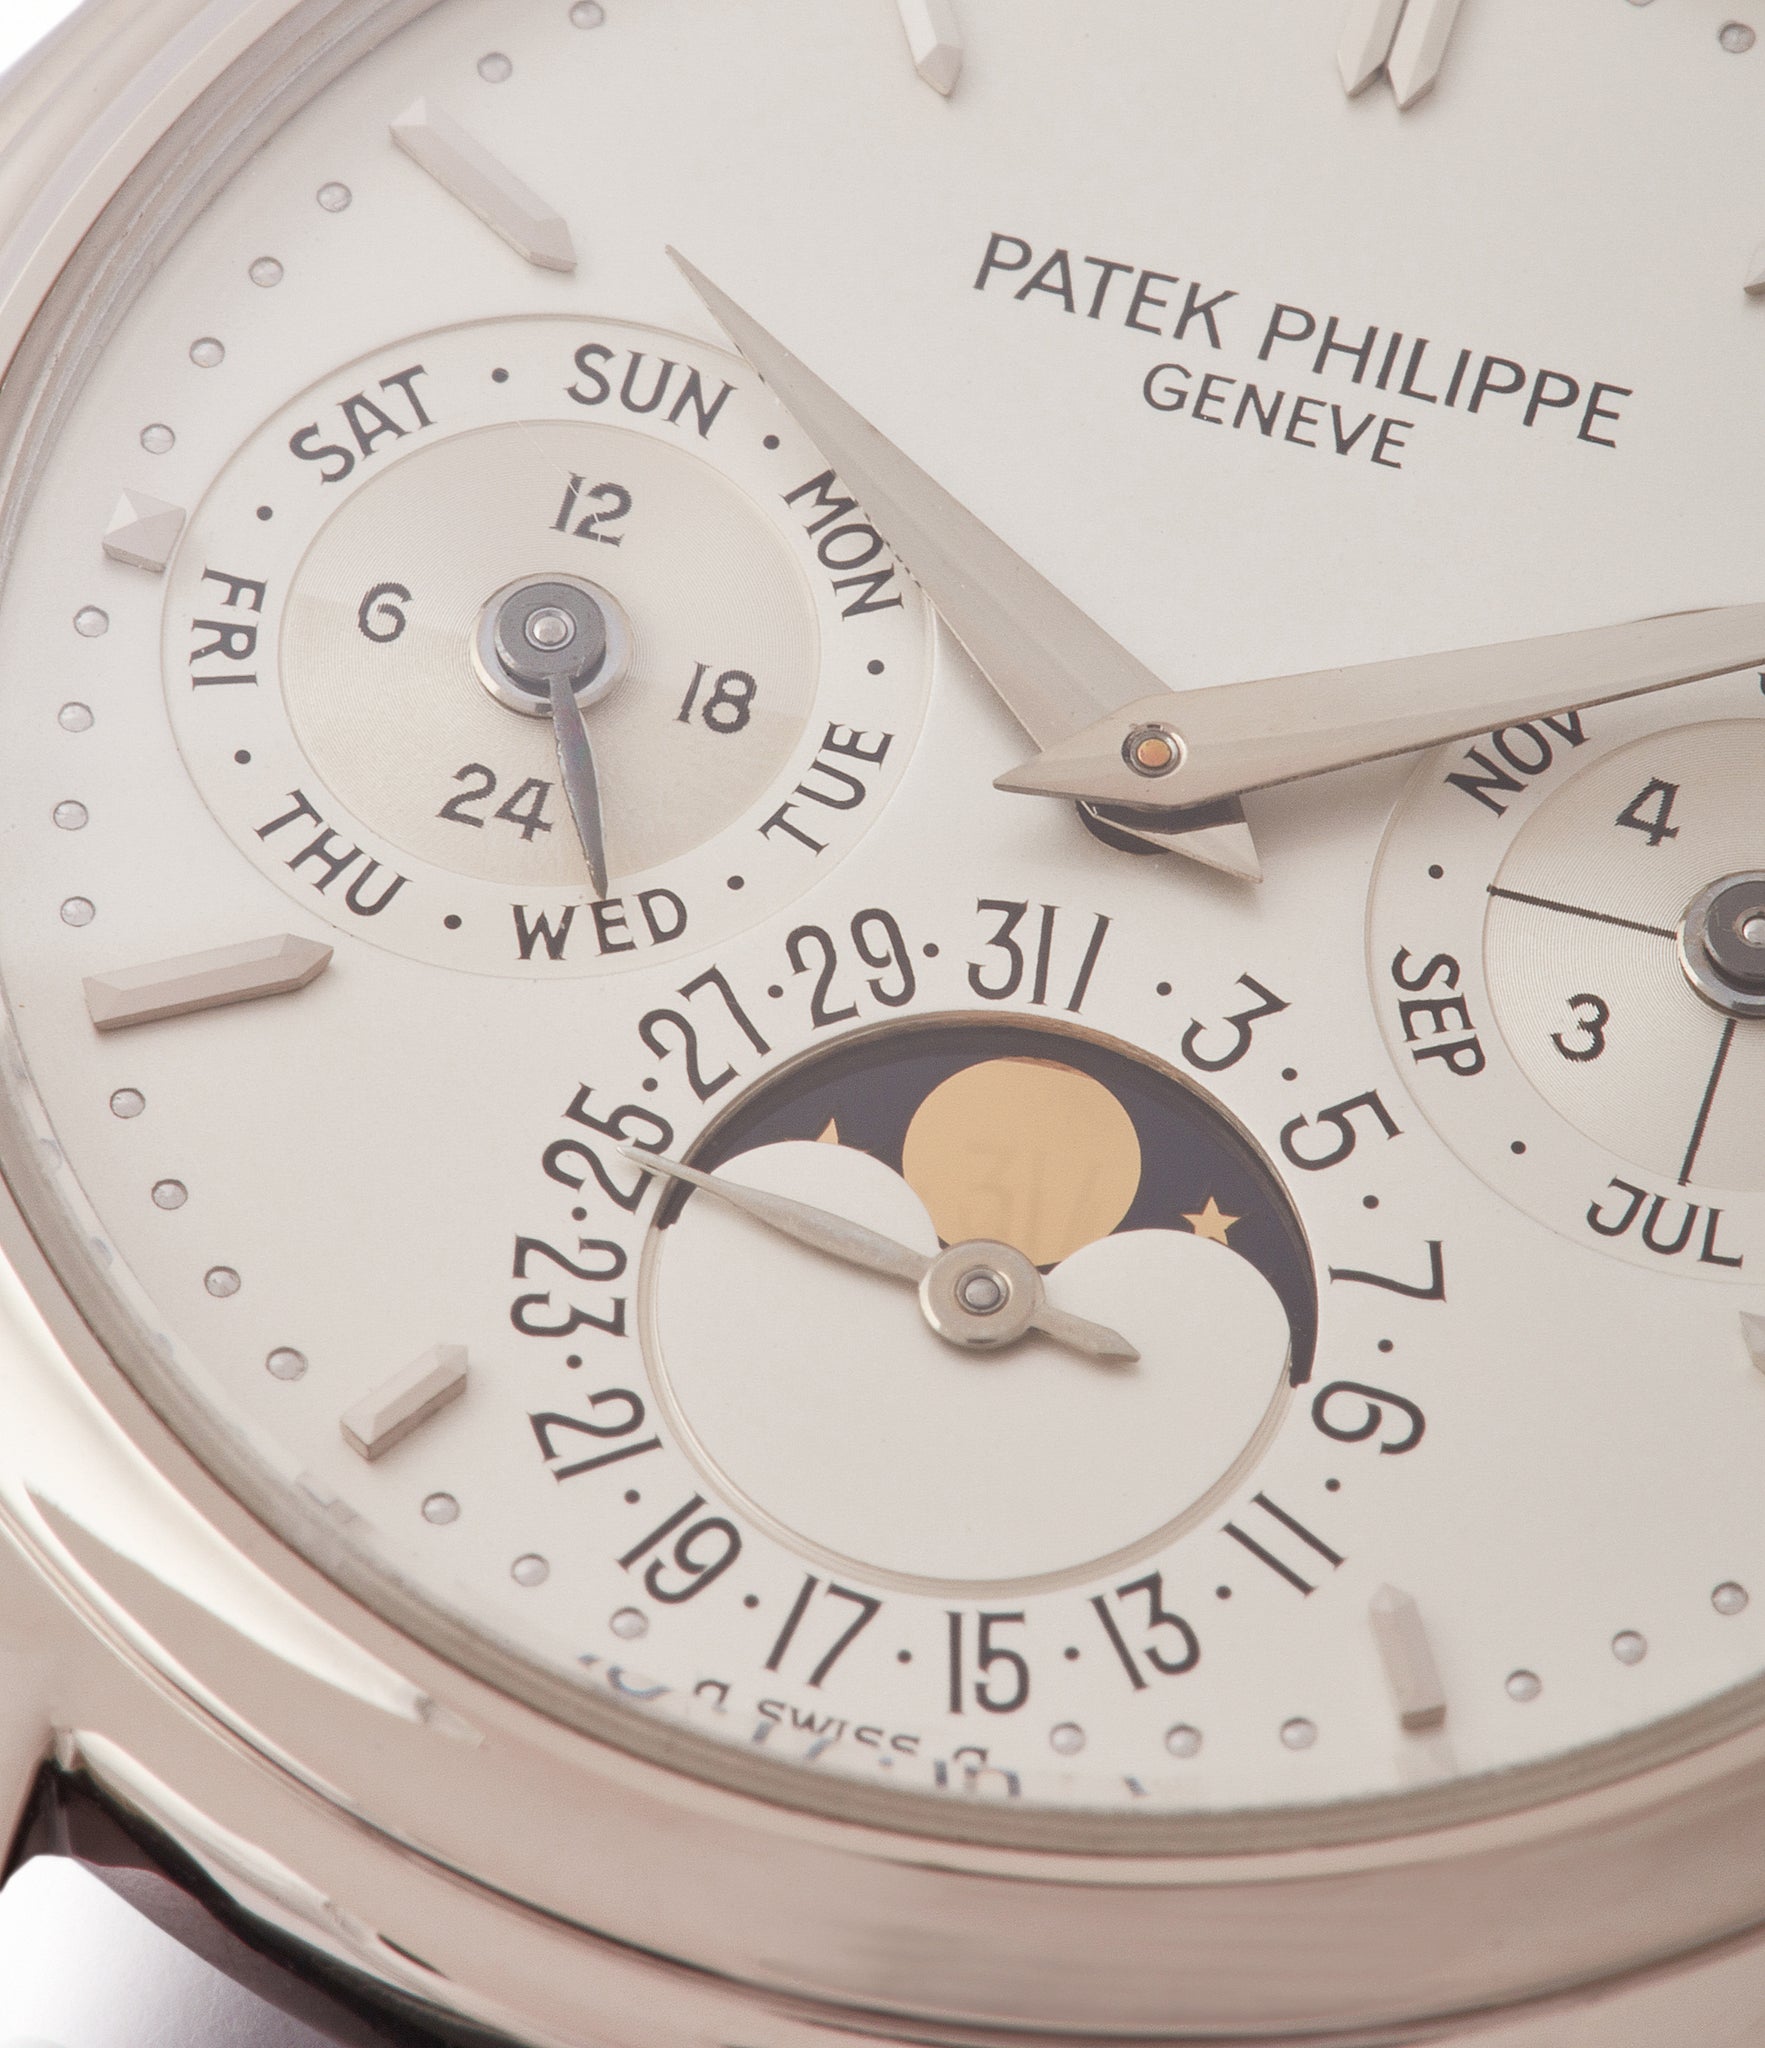 perpetual calendar 3940 Patek Philippe vintage rare watch English dial for sale online at A Collected Man London UK specialist of rare watches